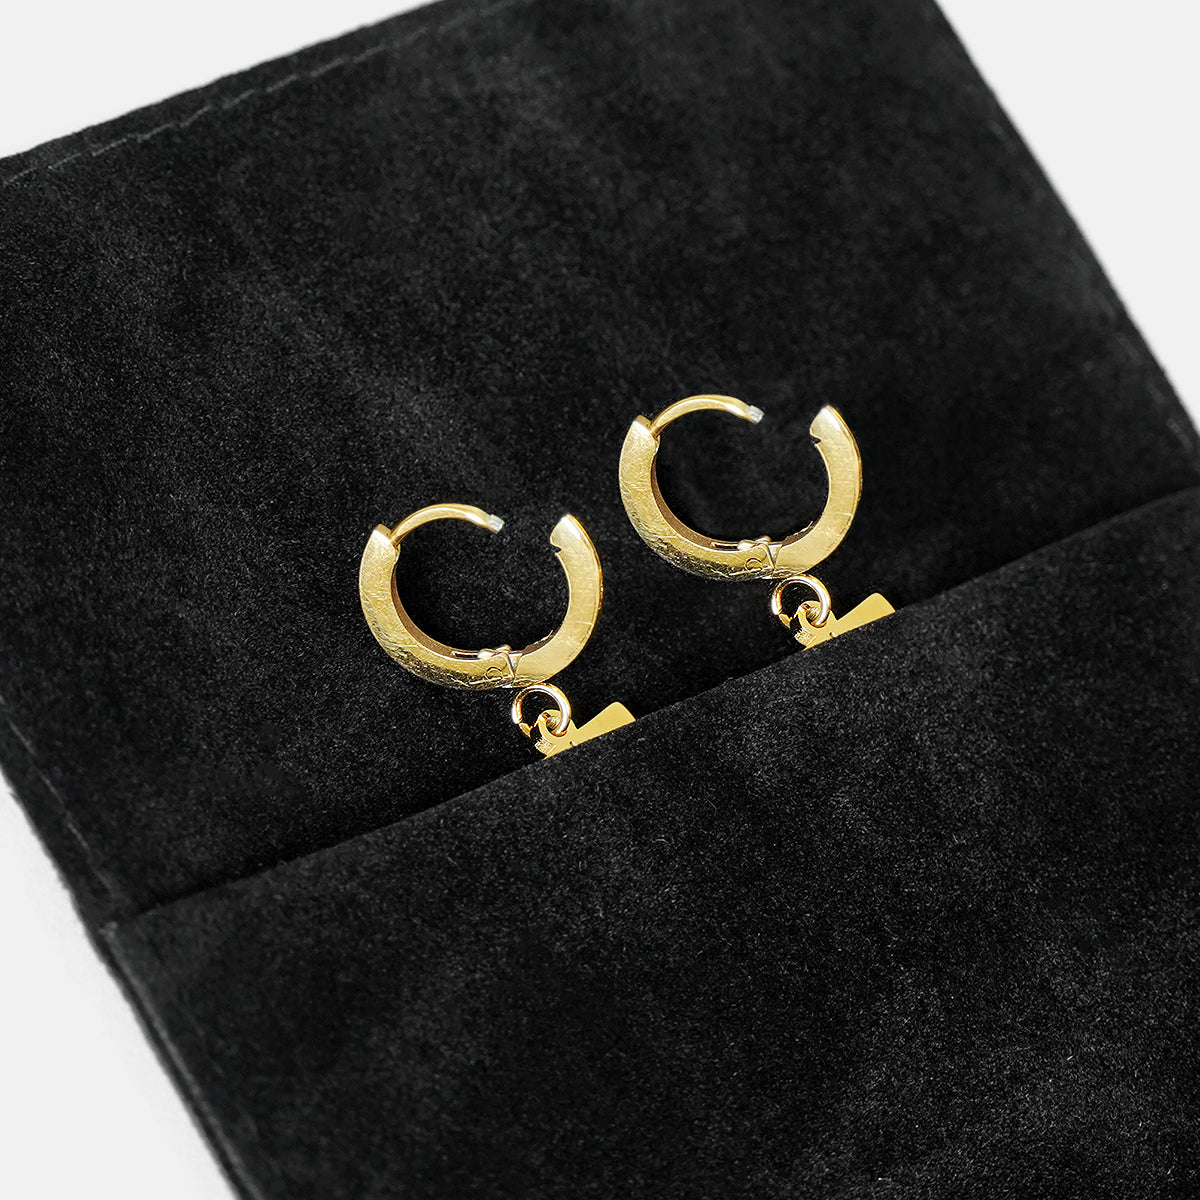 53 Number Earring - Gold Plated Stainless Steel